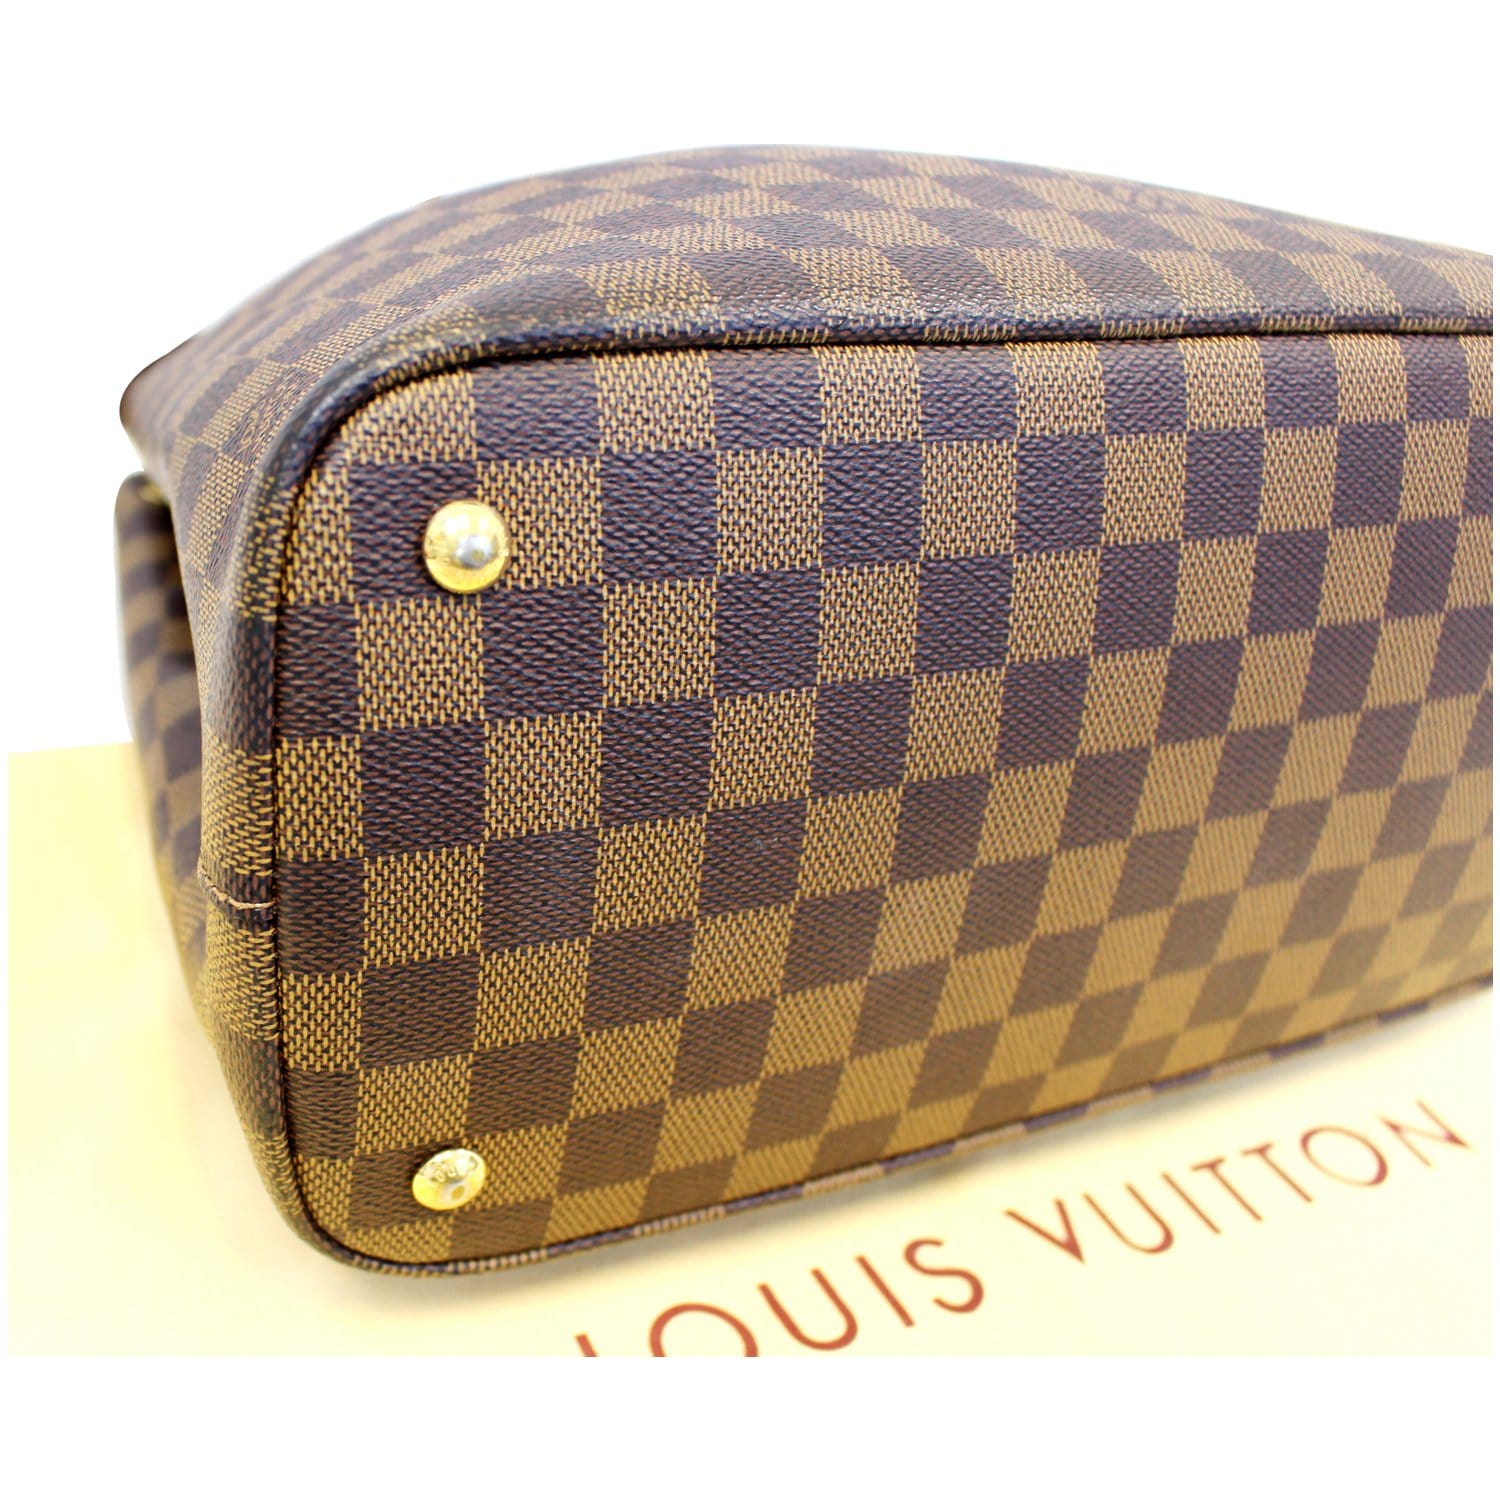 Snooty Fox on Instagram: Louis Vuitton Damier Kensington Handbag … $1349  ♦️SOLD♦️ This bag is available at the Harpers Pt location … 513-489-2434.  This item has been authenticated via Entrupy. Call with